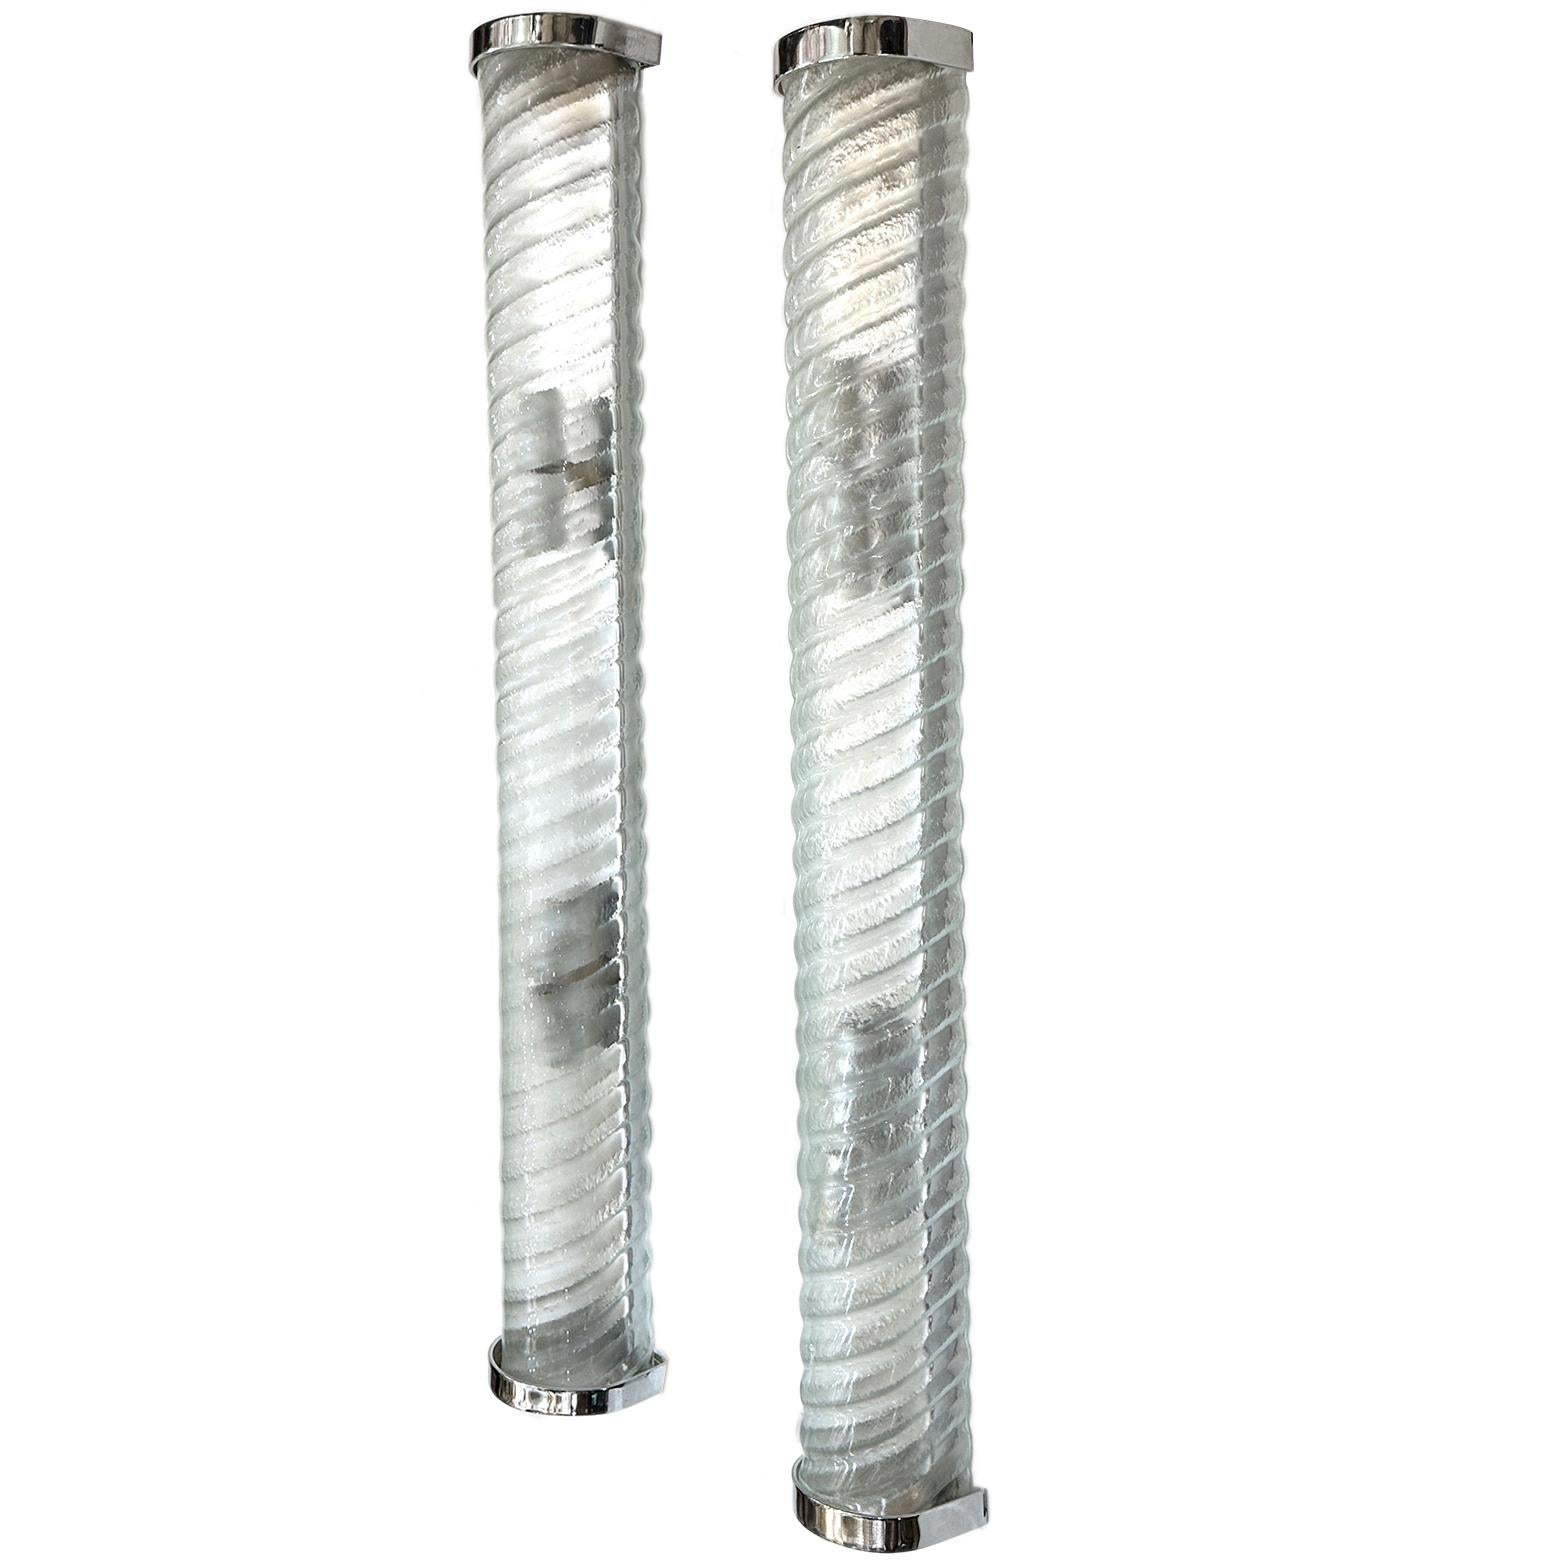 Pair of large Italian 1960's molded glass sconces with interior lights.

Measurements:
Height: 32